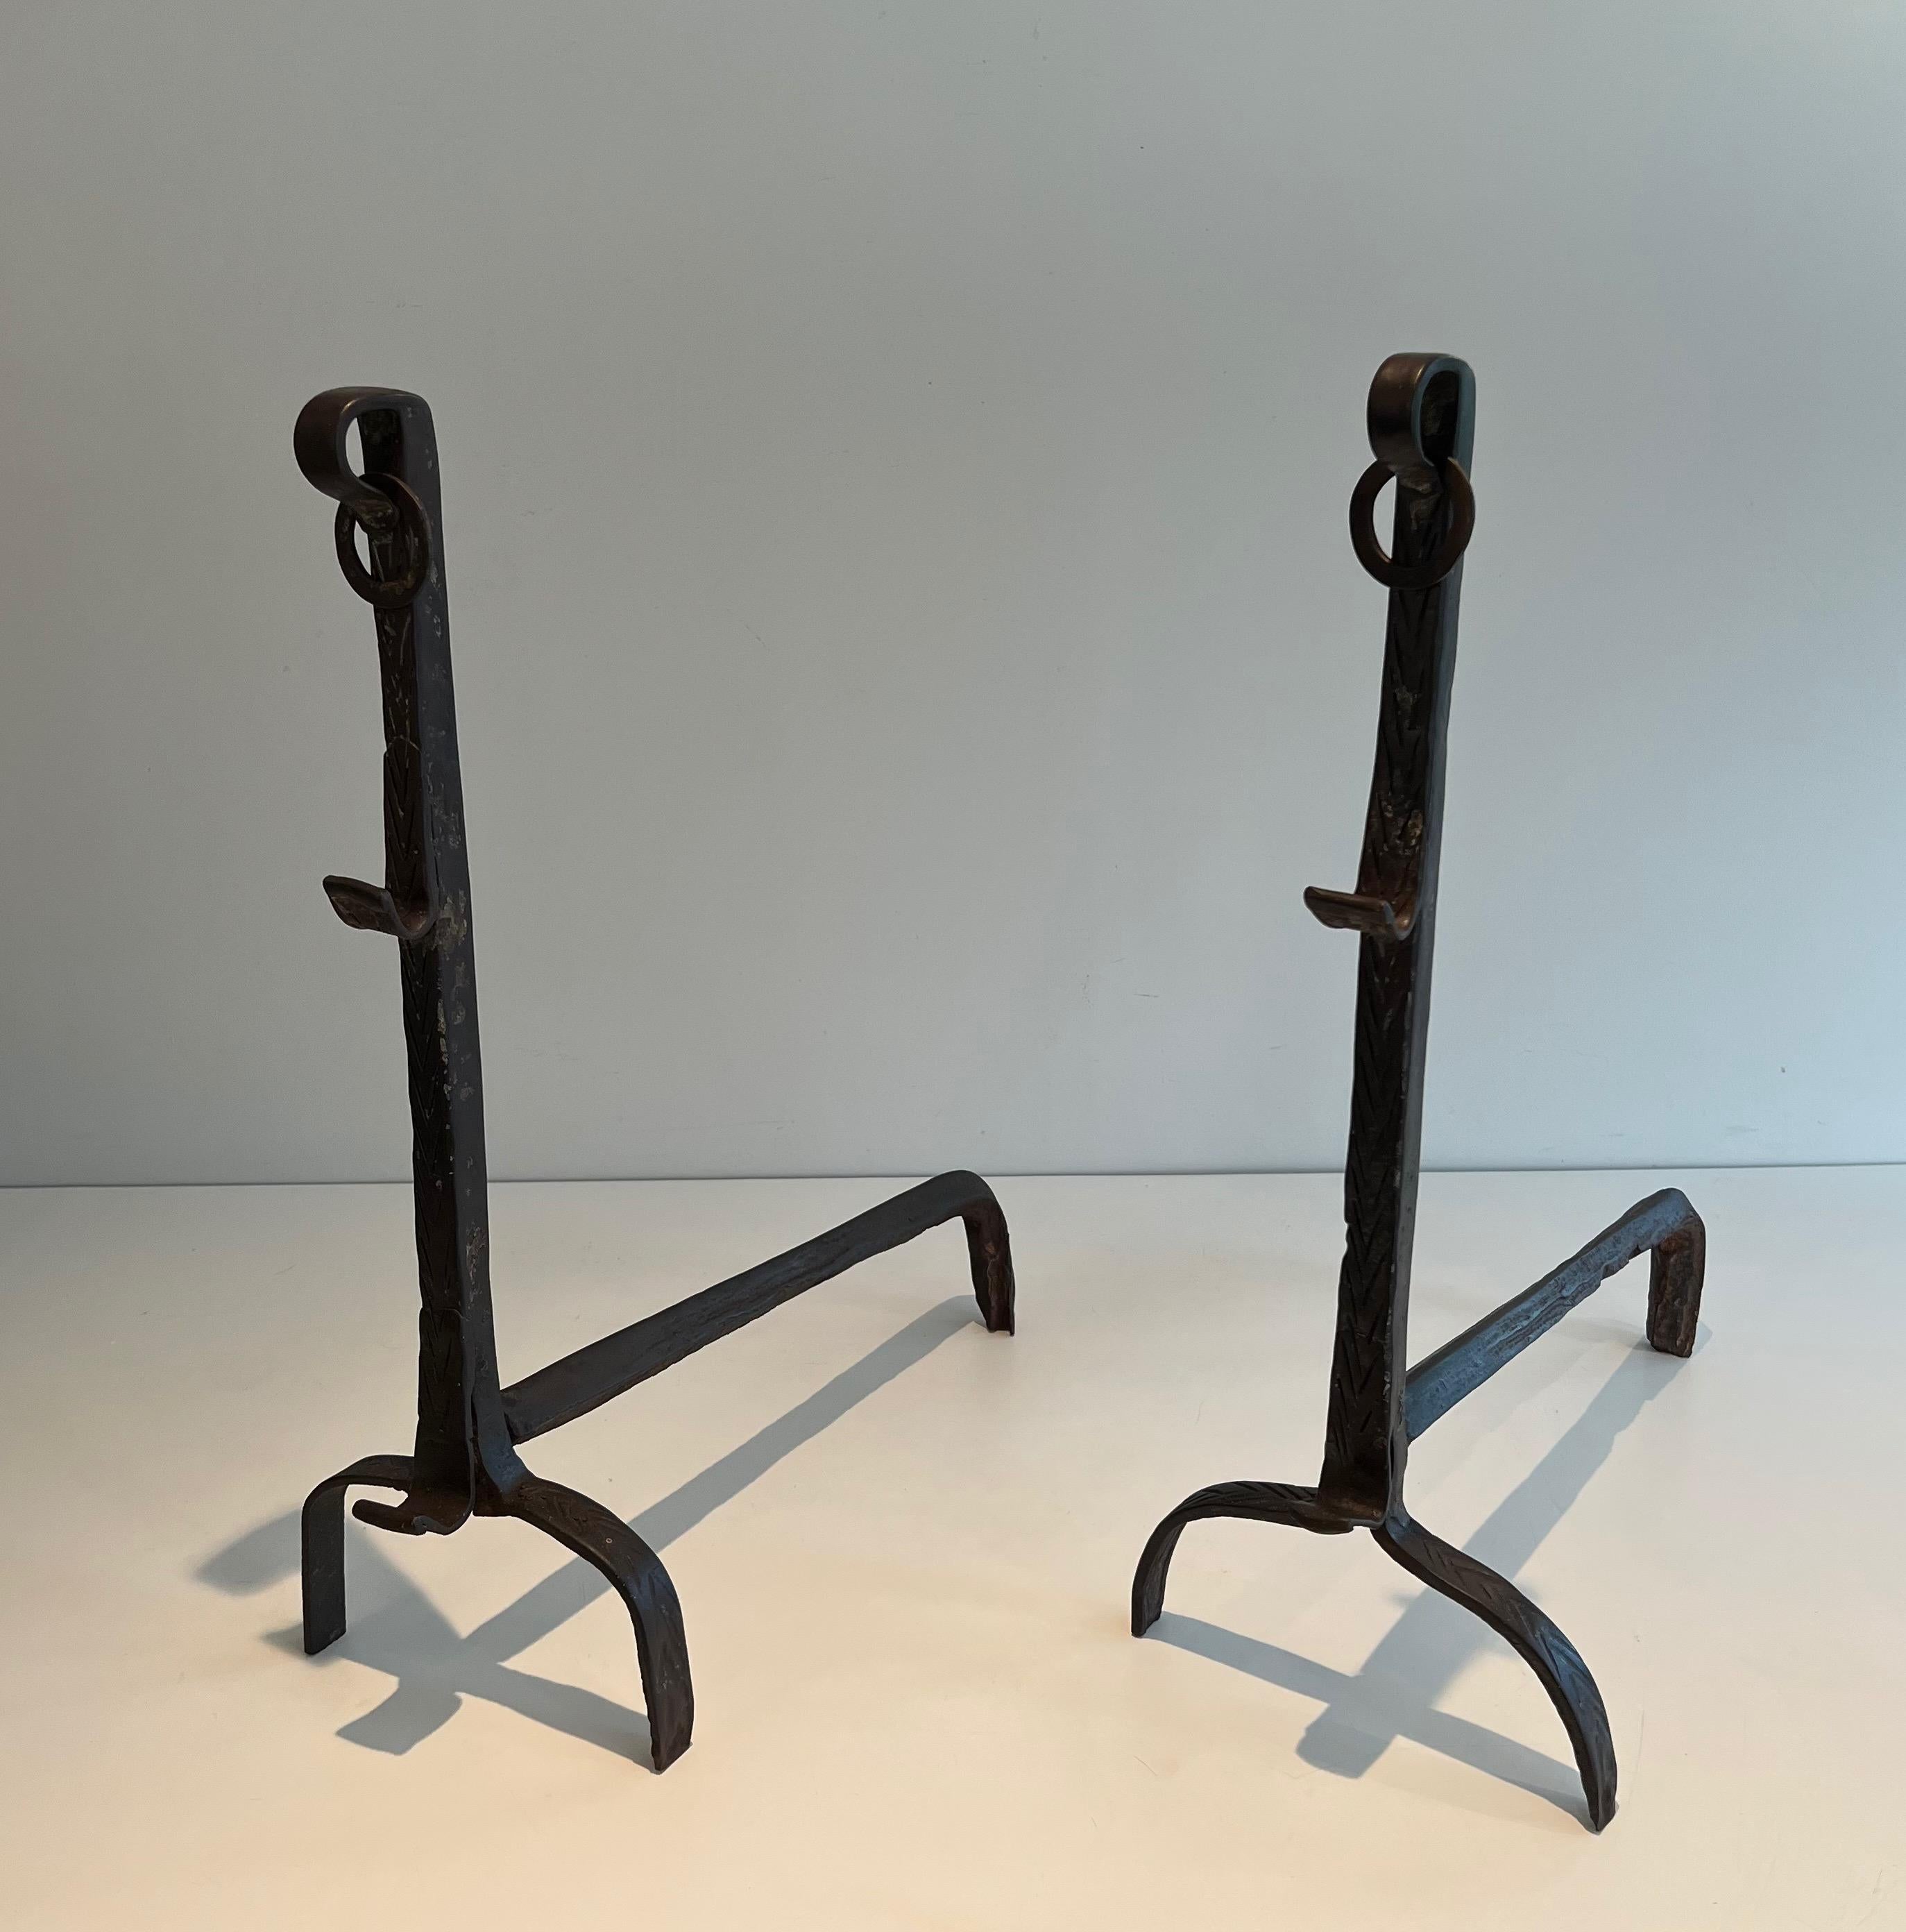 This pair of landiers are made of wrought iron. They have a rack, a 